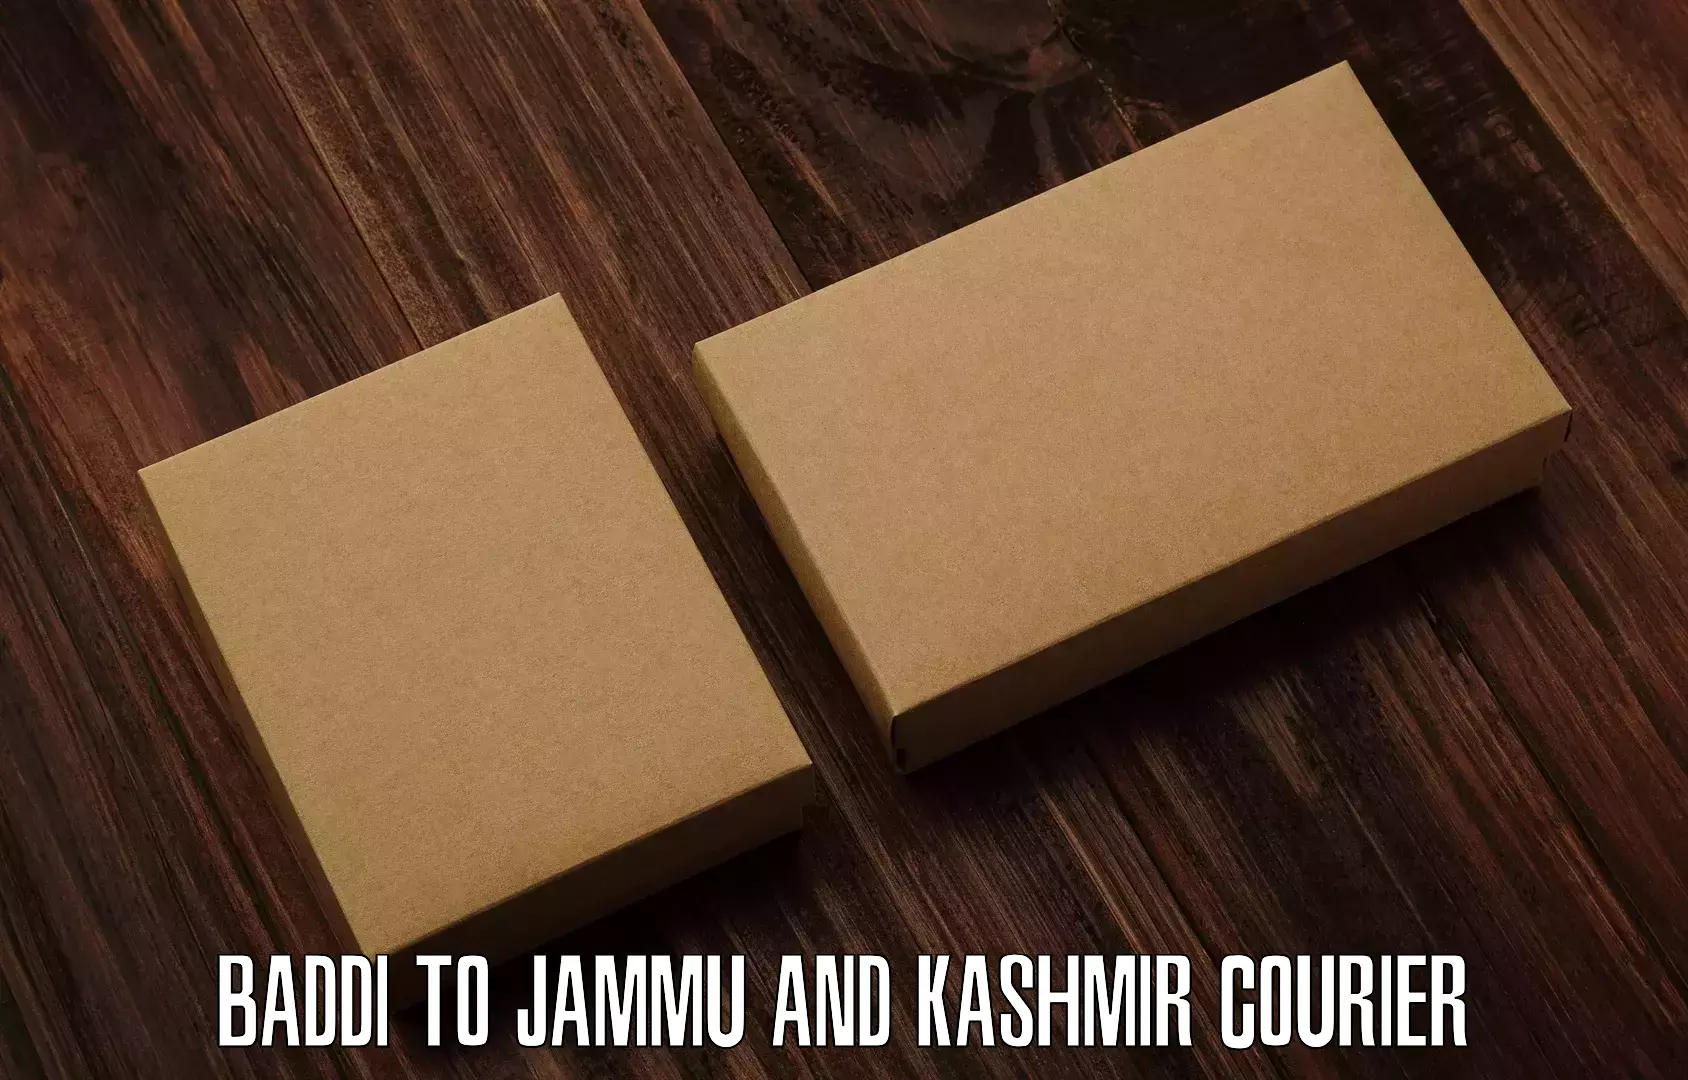 Same-day delivery solutions Baddi to Katra